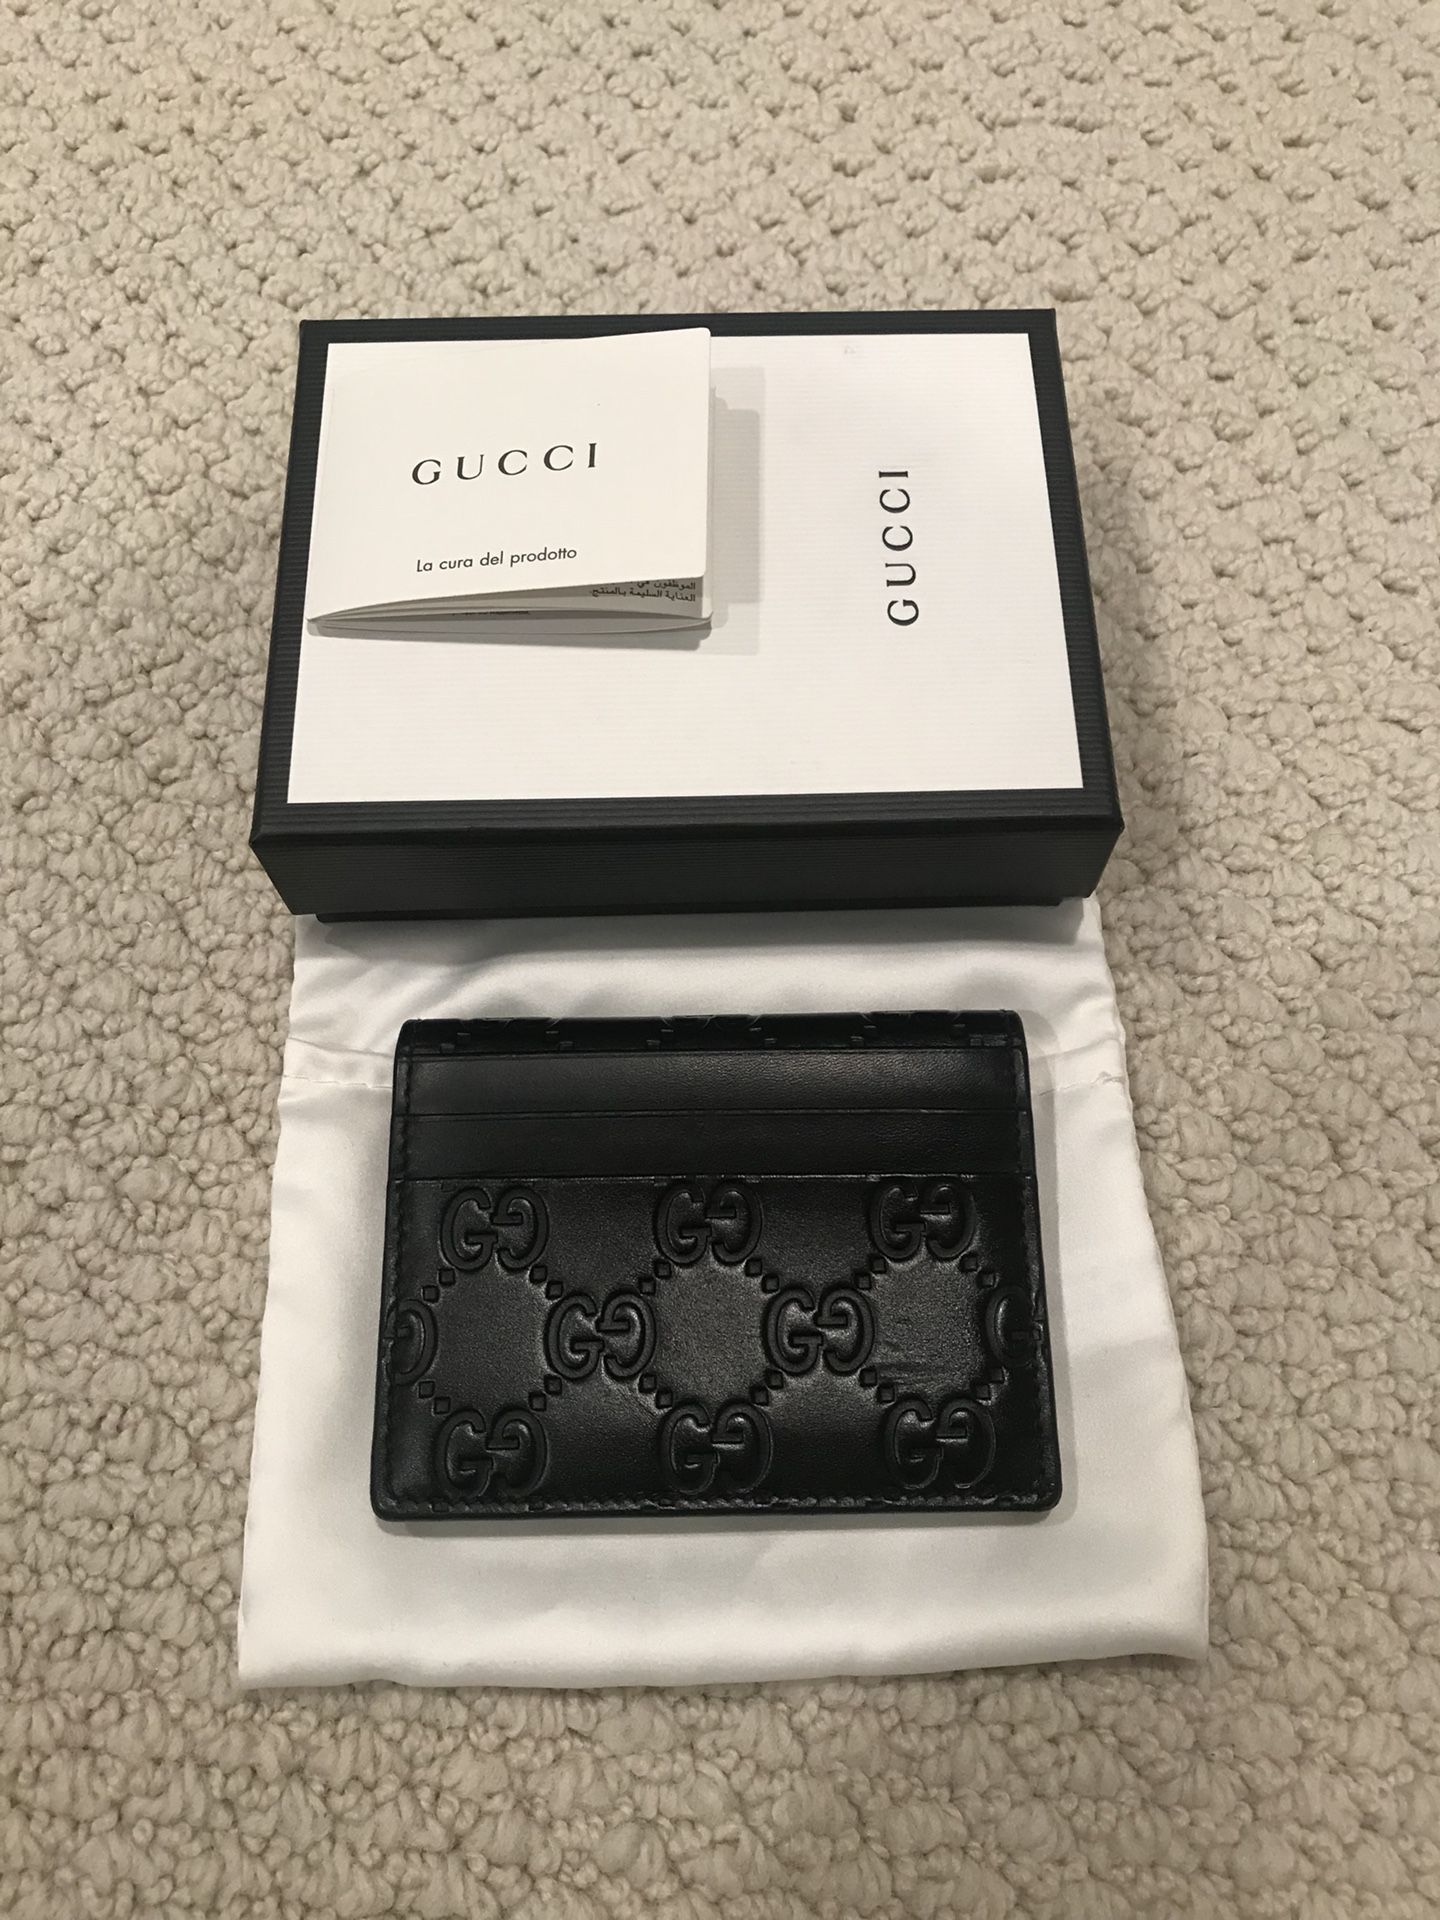 Gucci credit card wallet for Sale in Cupertino, CA - OfferUp